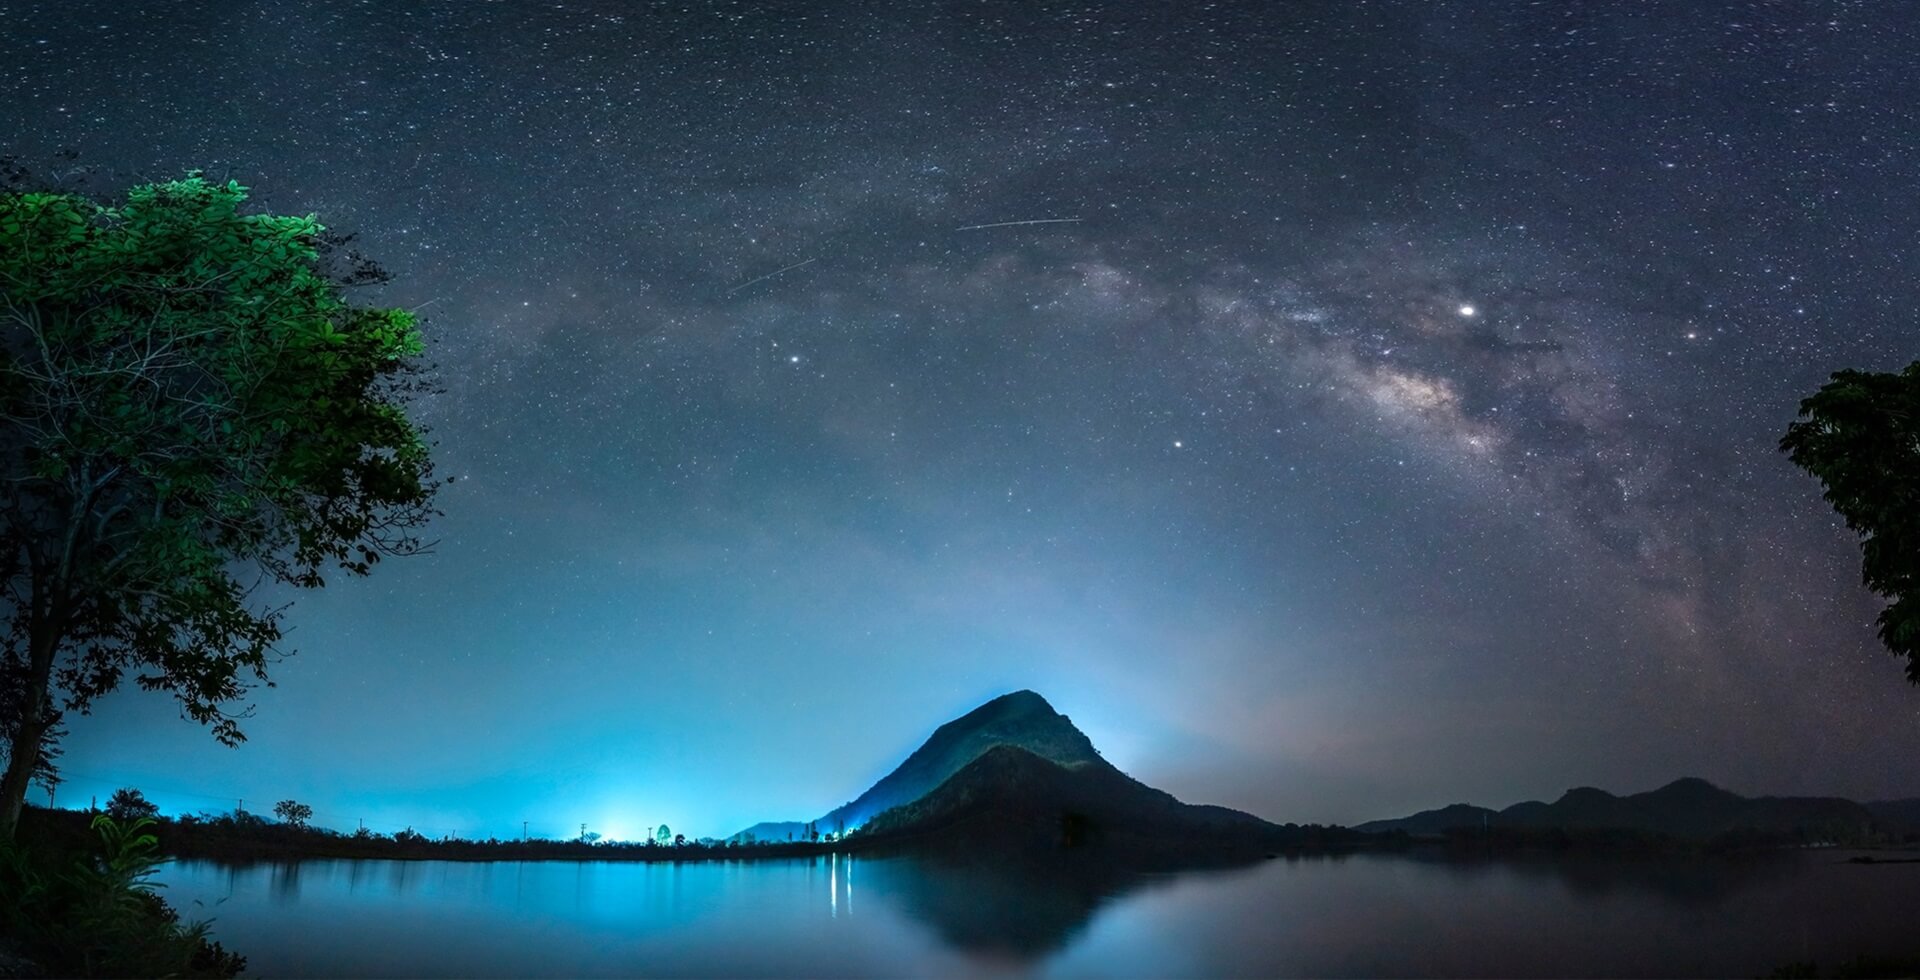 Footer Night sky with stars and The Milky Way is above the mountain and reflection on the water (Lam Isu Reservoir) Kanchanaburi, Thailand